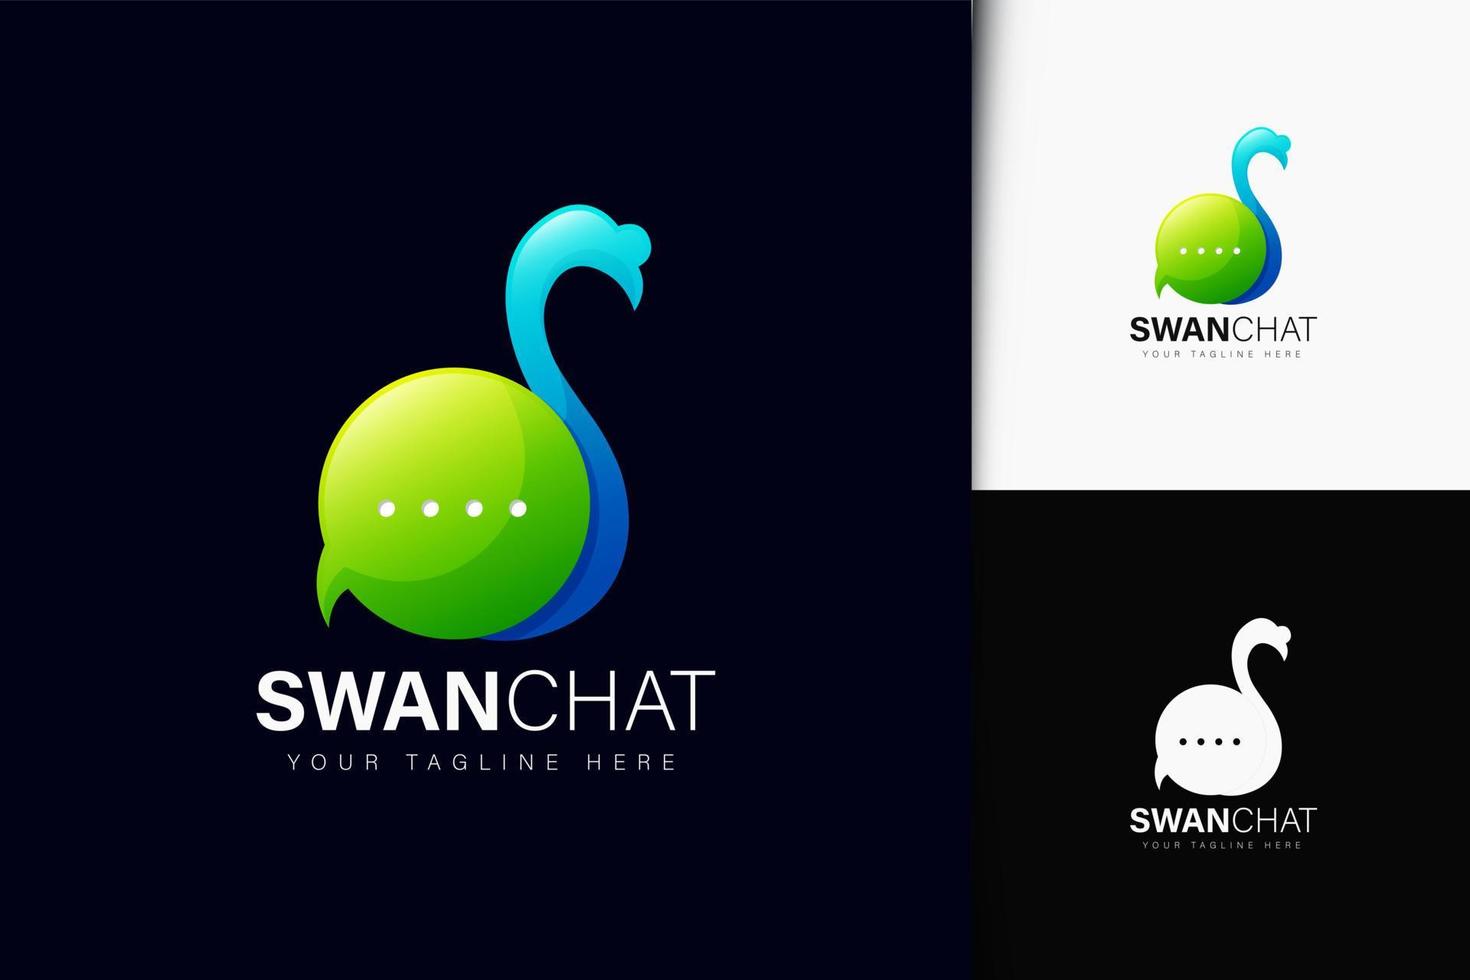 Swan chat logo design with gradient vector